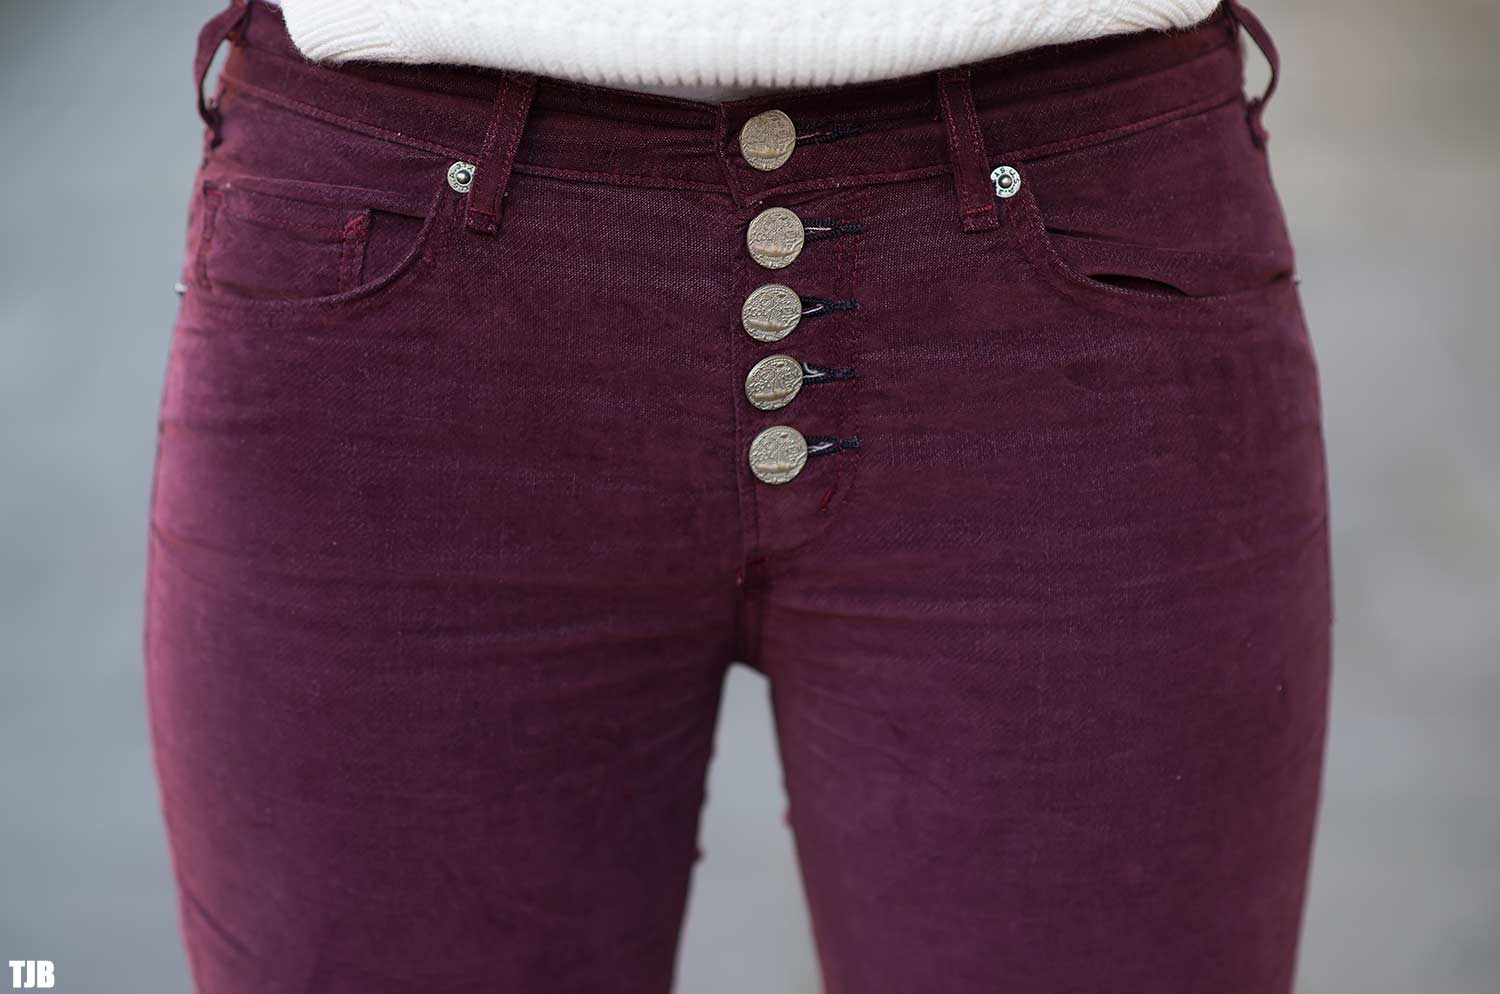 mcguire-denim-newton-exposed-button-skinny-pants-in-pinot-review-8